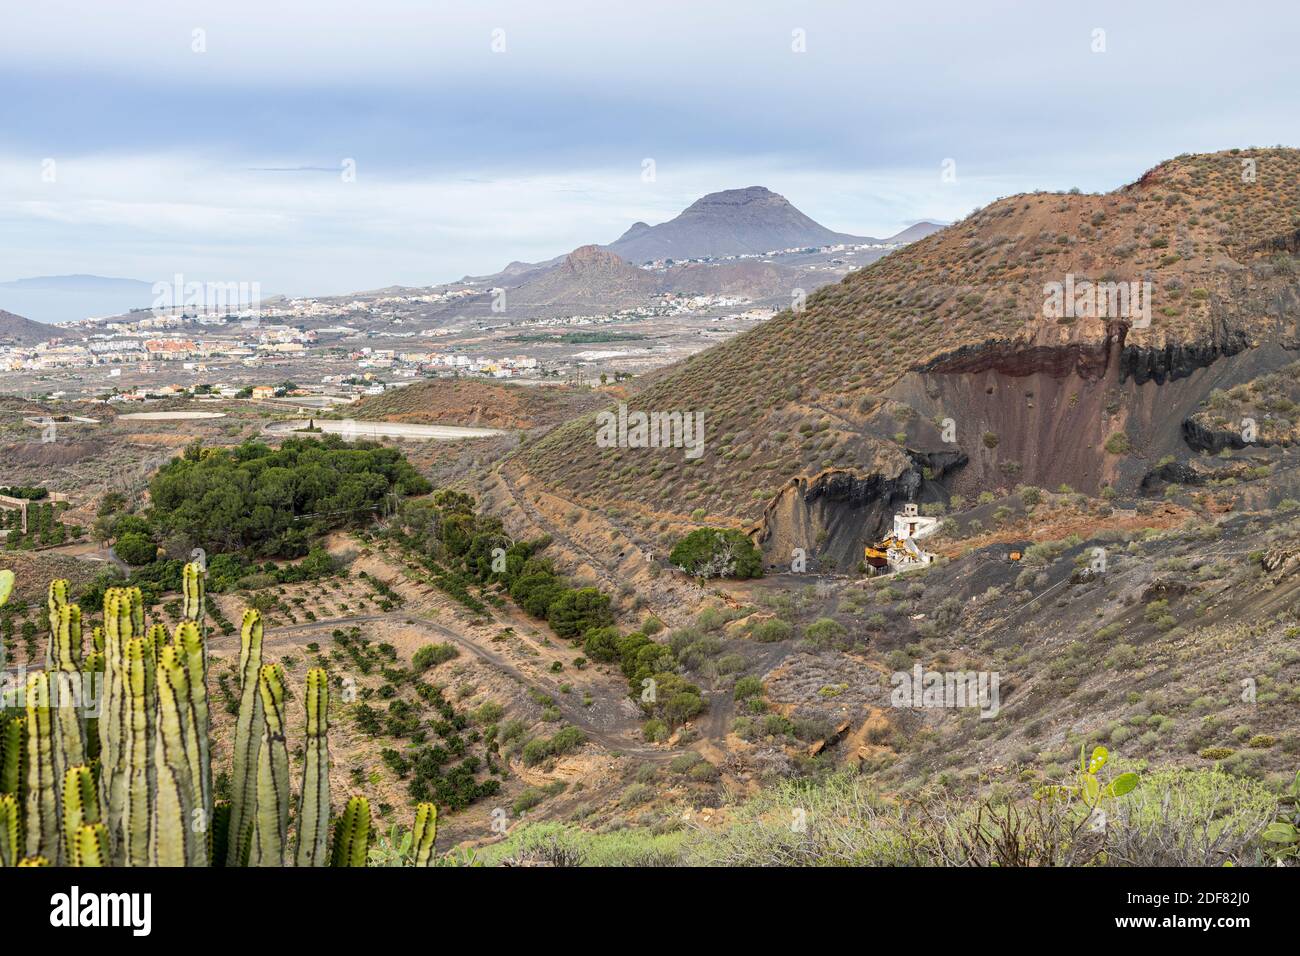 Disused quarry in the side of a volcanic cone in San Miguel de Abona, Tenerife, Canary Islands, Spain Stock Photo